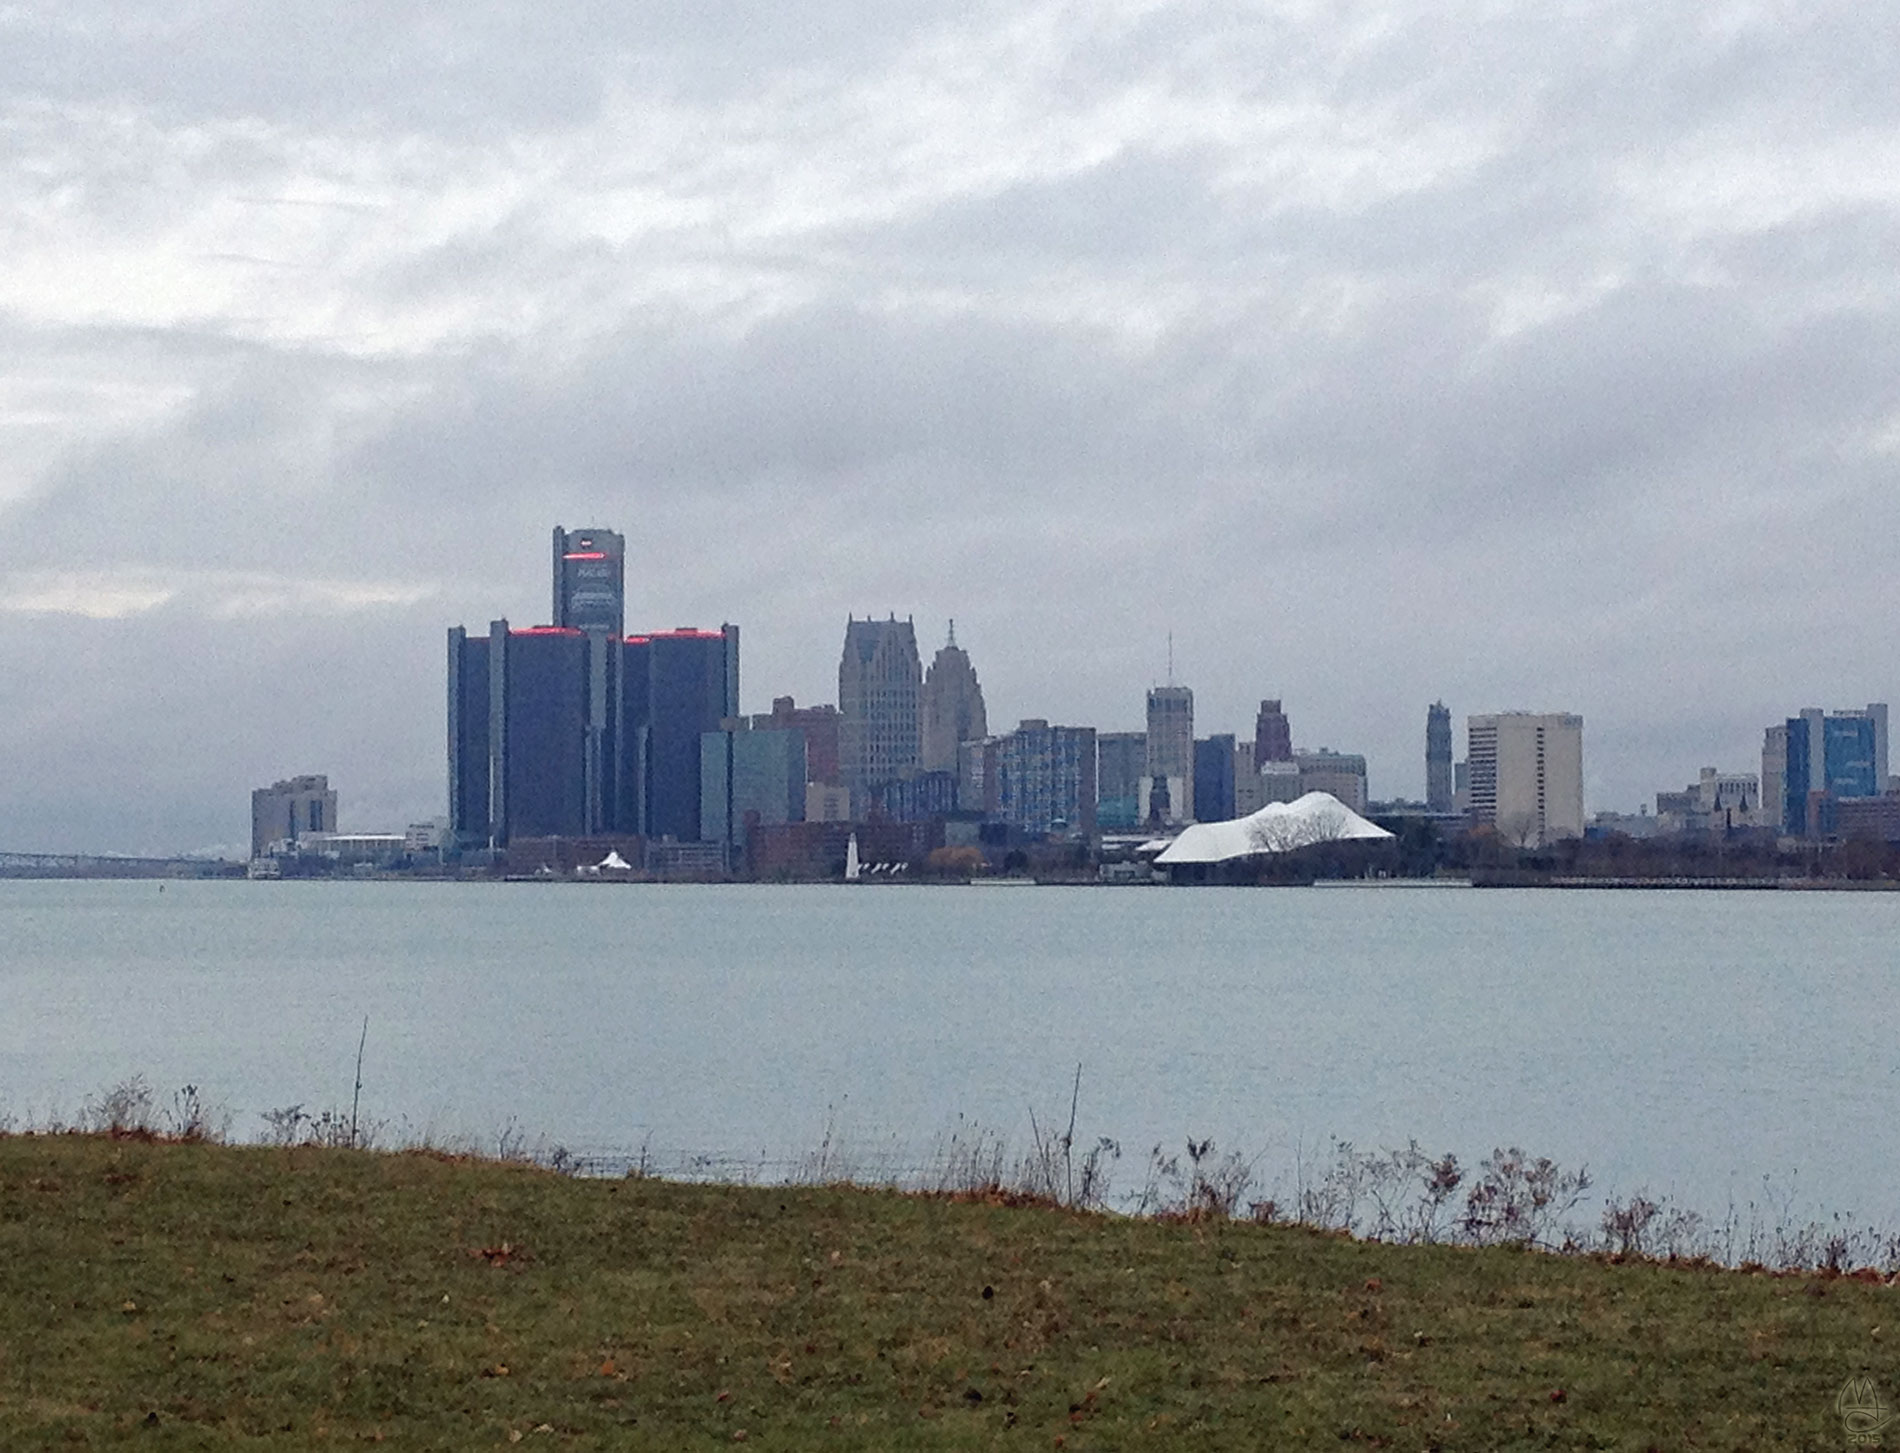 View of the General Motors HQ (Renaissance Center) from Belle Isle